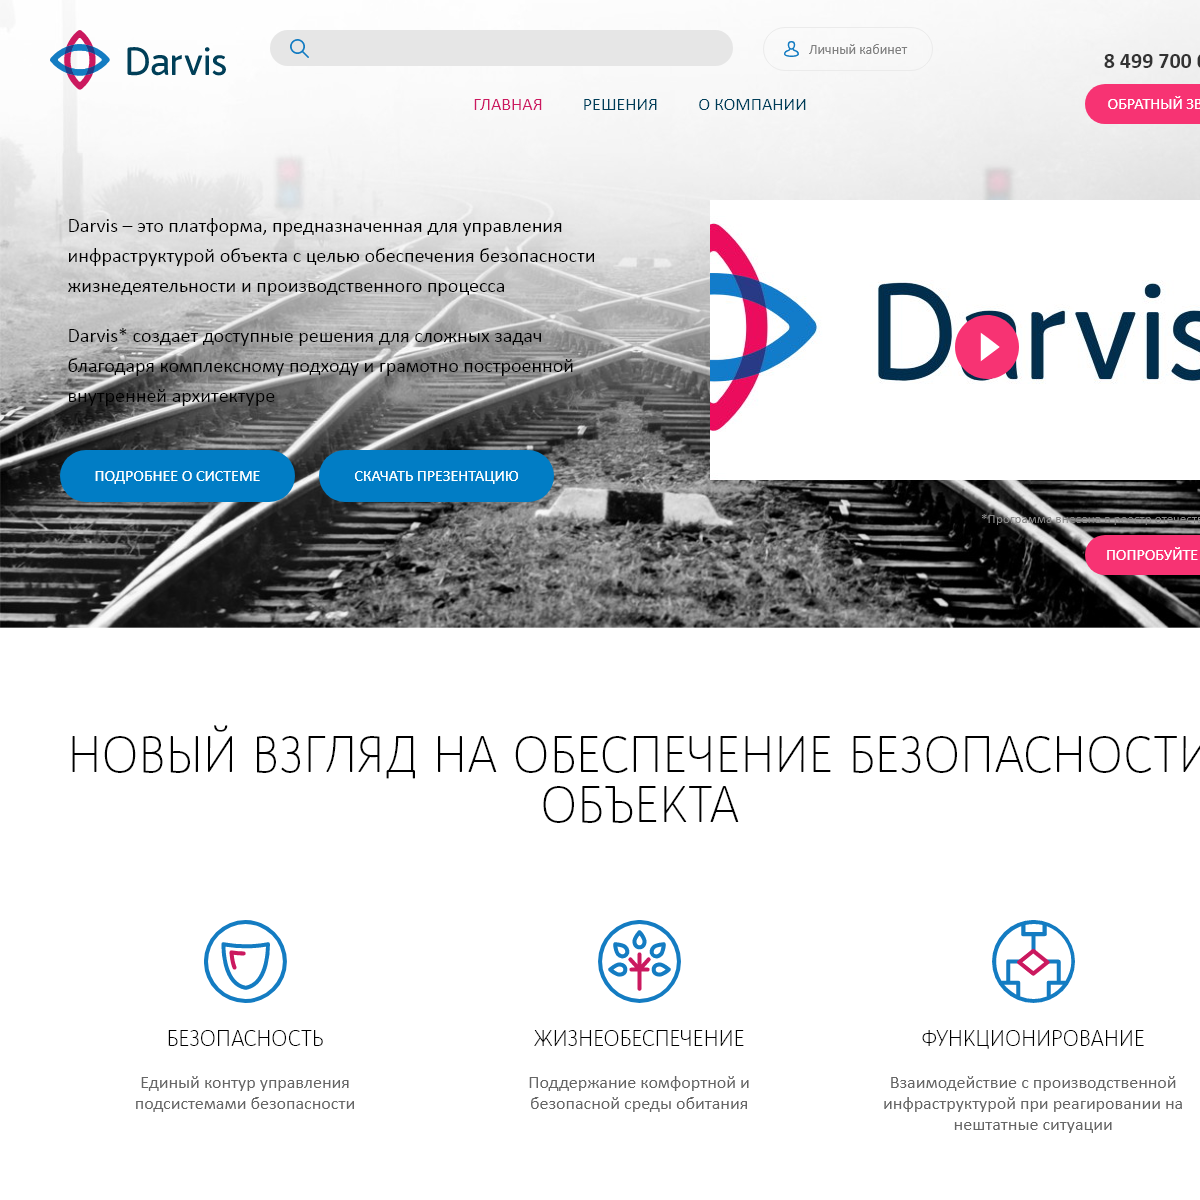 A complete backup of darvis.pro